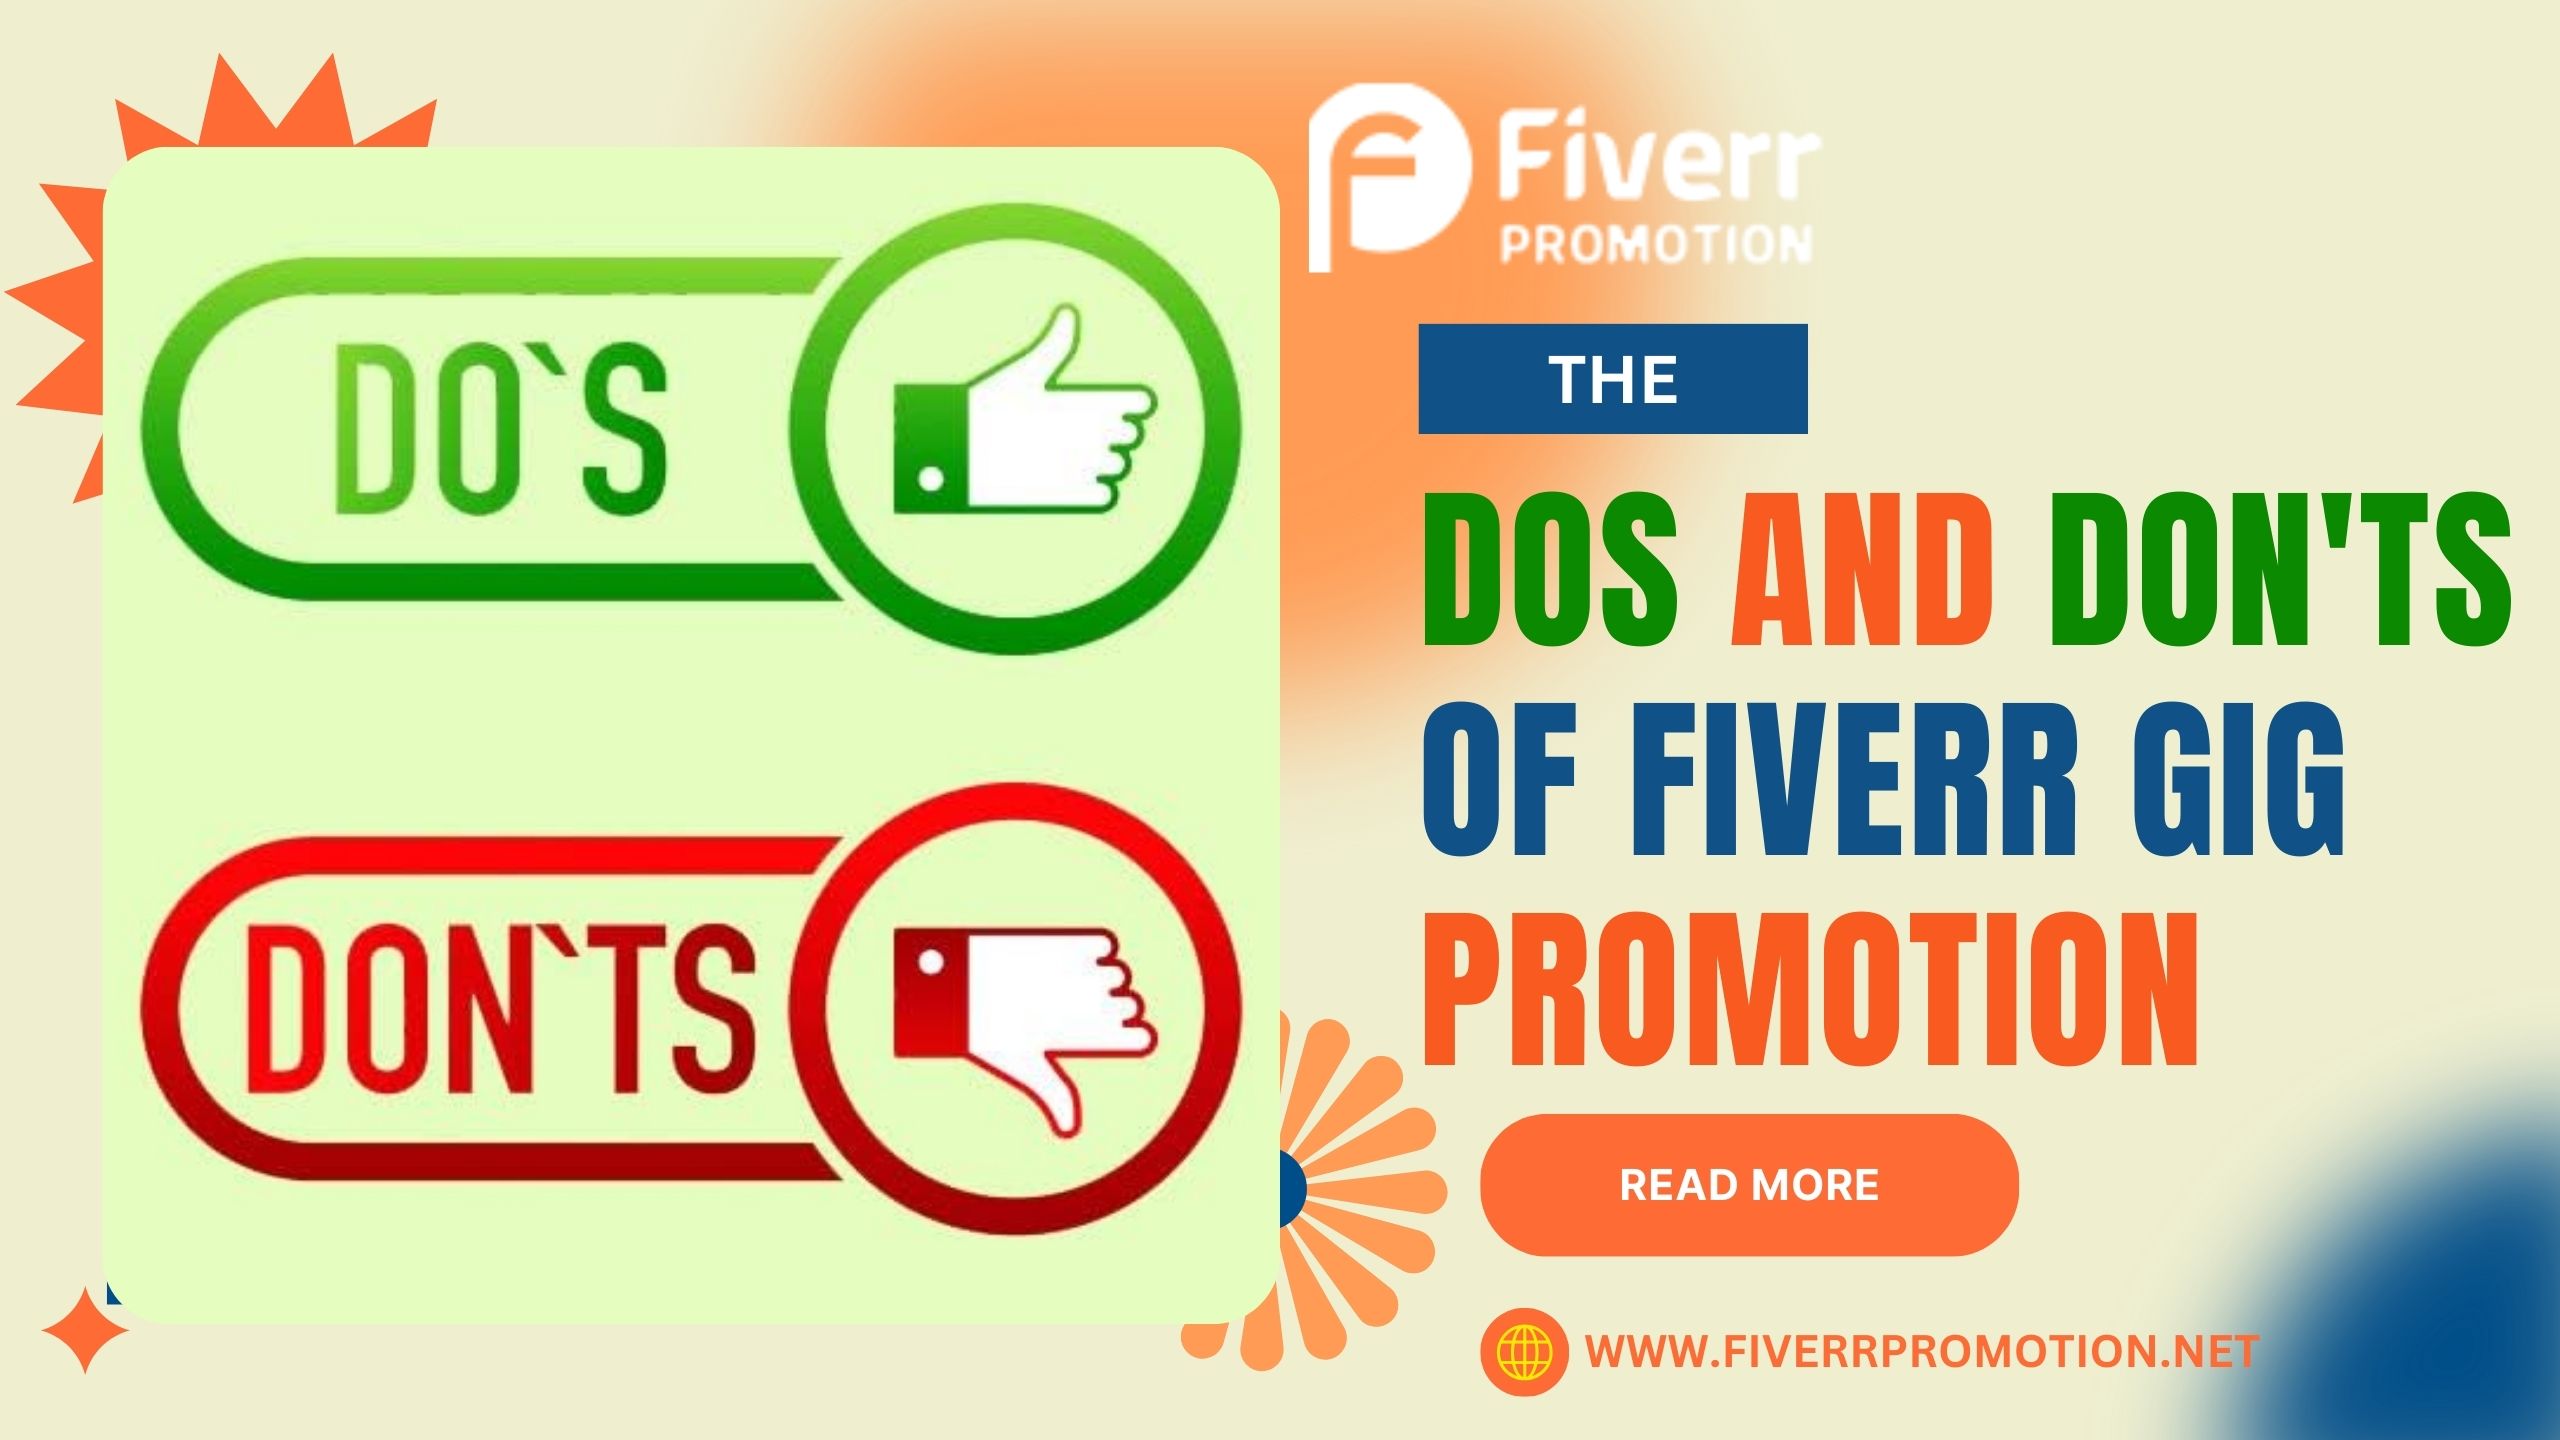 The dos and don’ts of Fiverr gig promotion